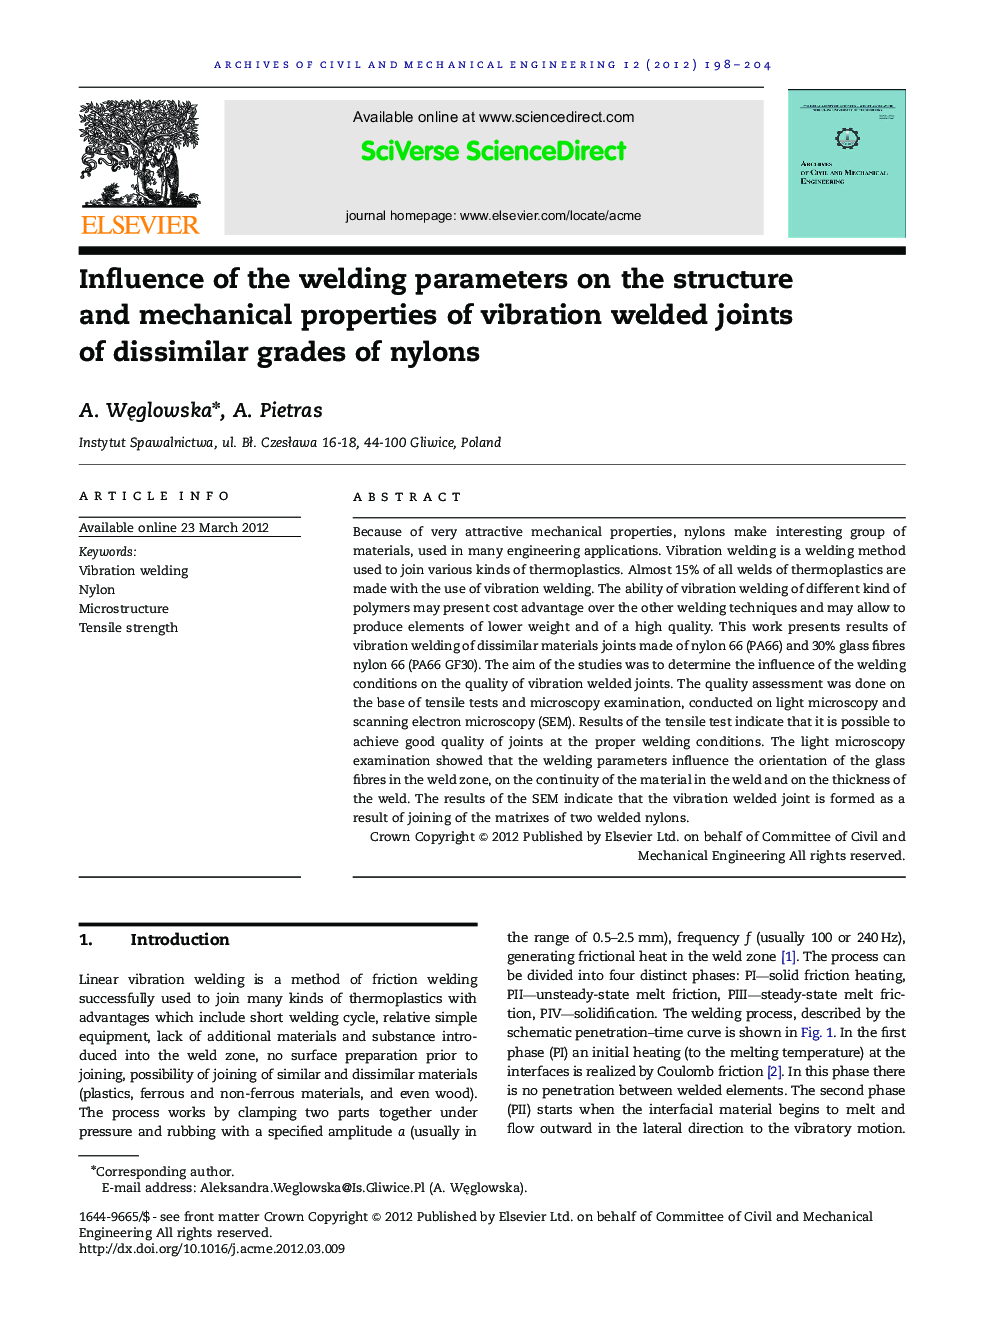 Influence of the welding parameters on the structure and mechanical properties of vibration welded joints of dissimilar grades of nylons